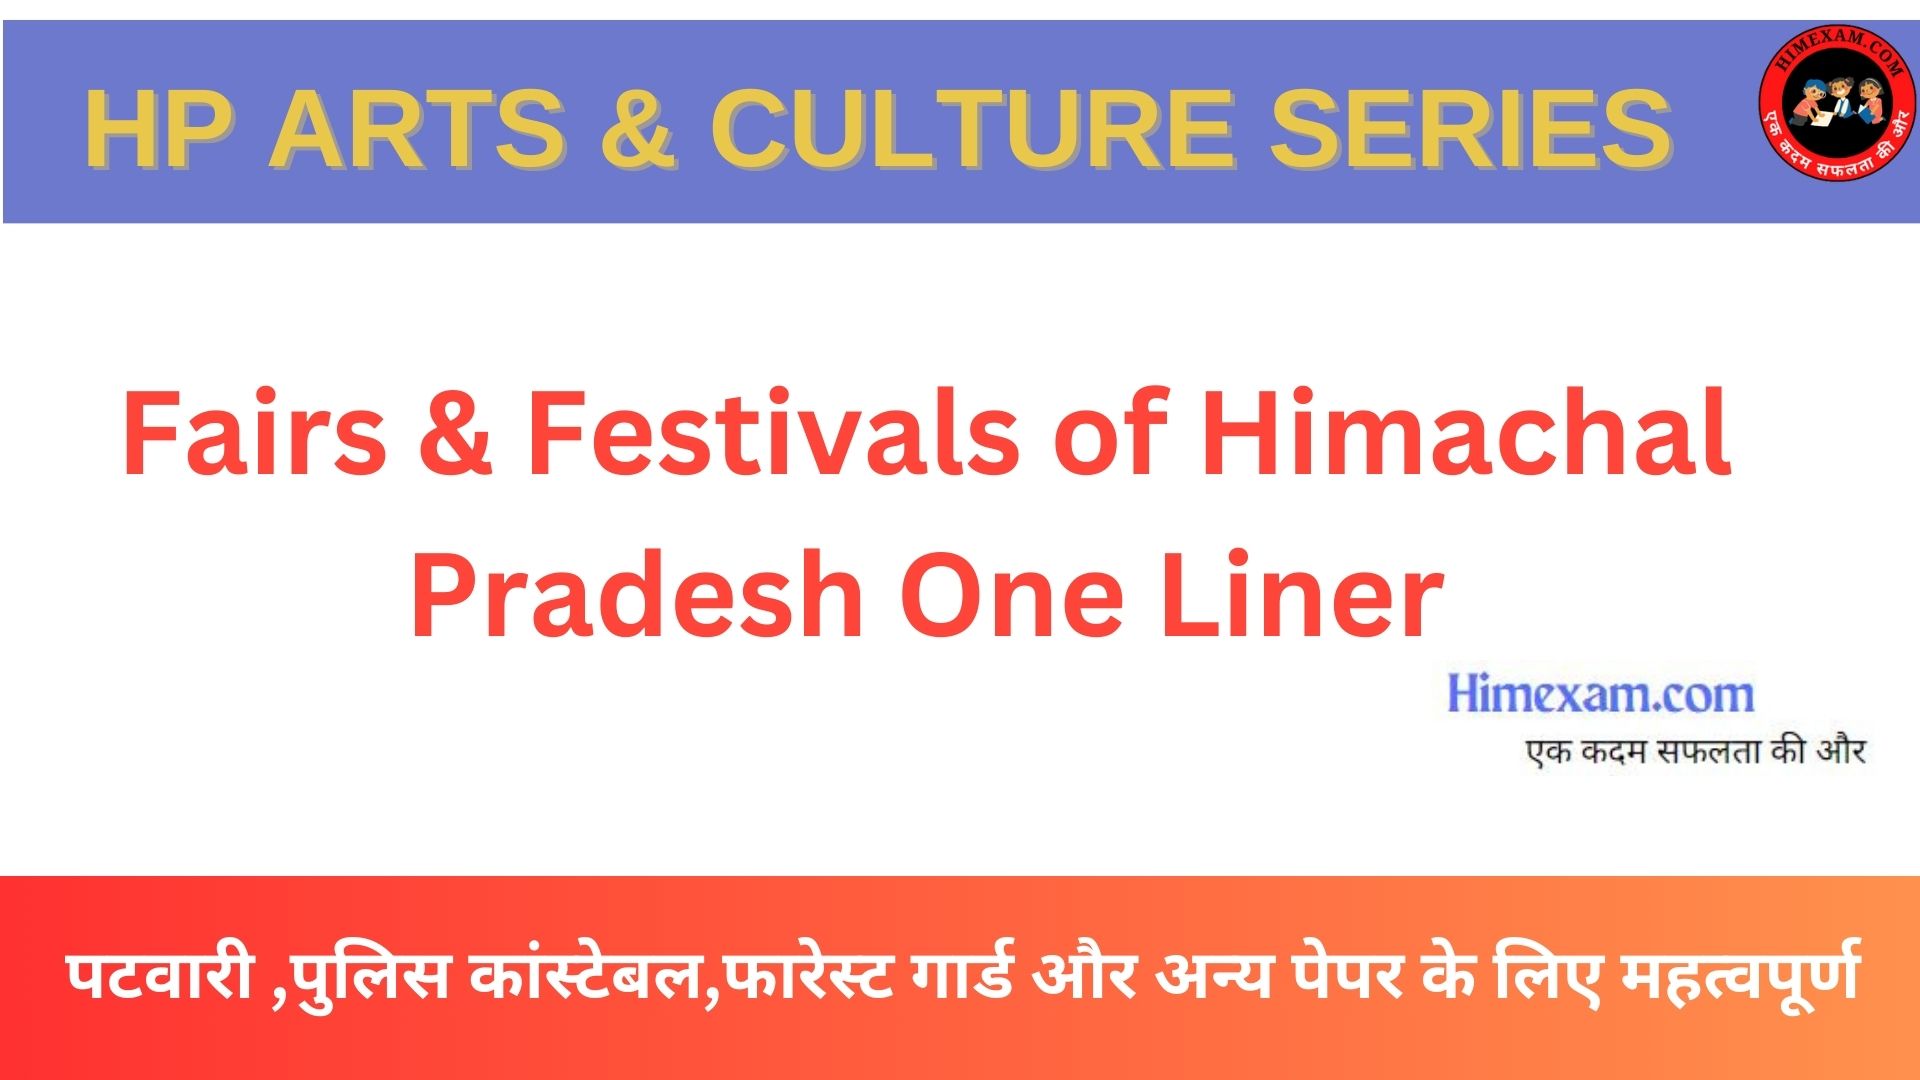 Religious Beliefs And Practices of Himachal Pradesh One Liner